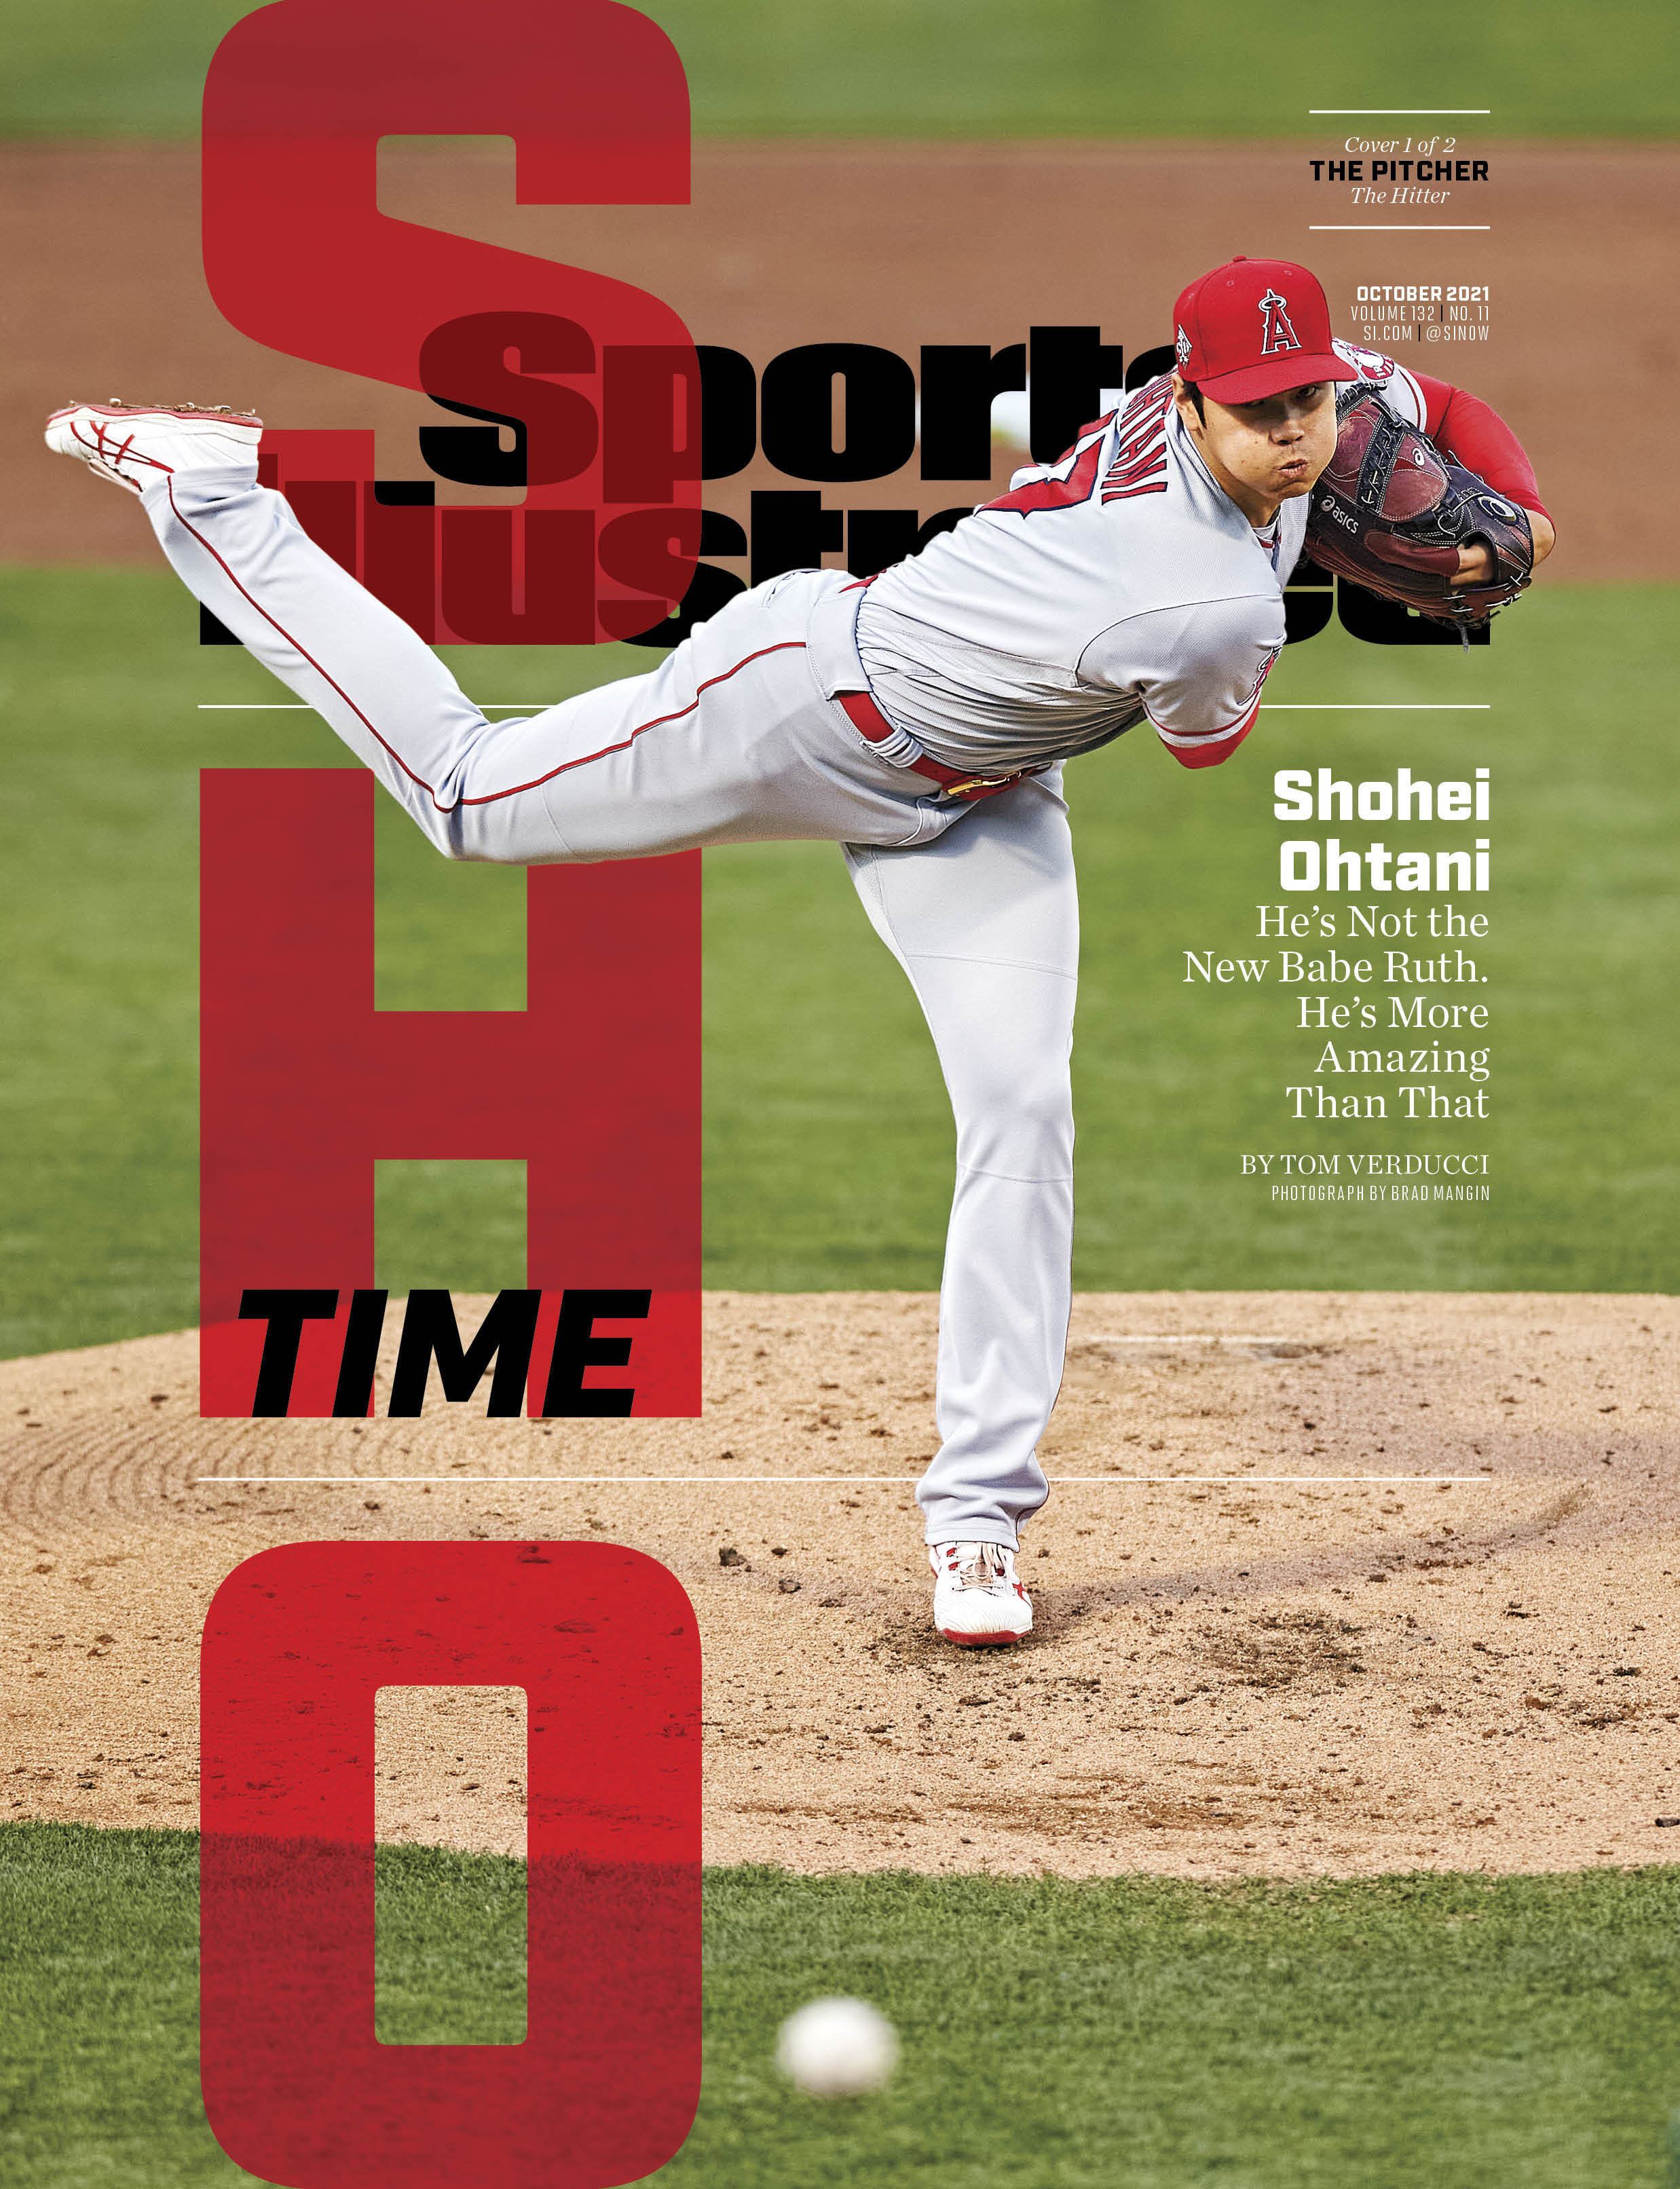 Two Sports Illustrated Covers for Shohei Ohtani; The Hitter & Pitcher